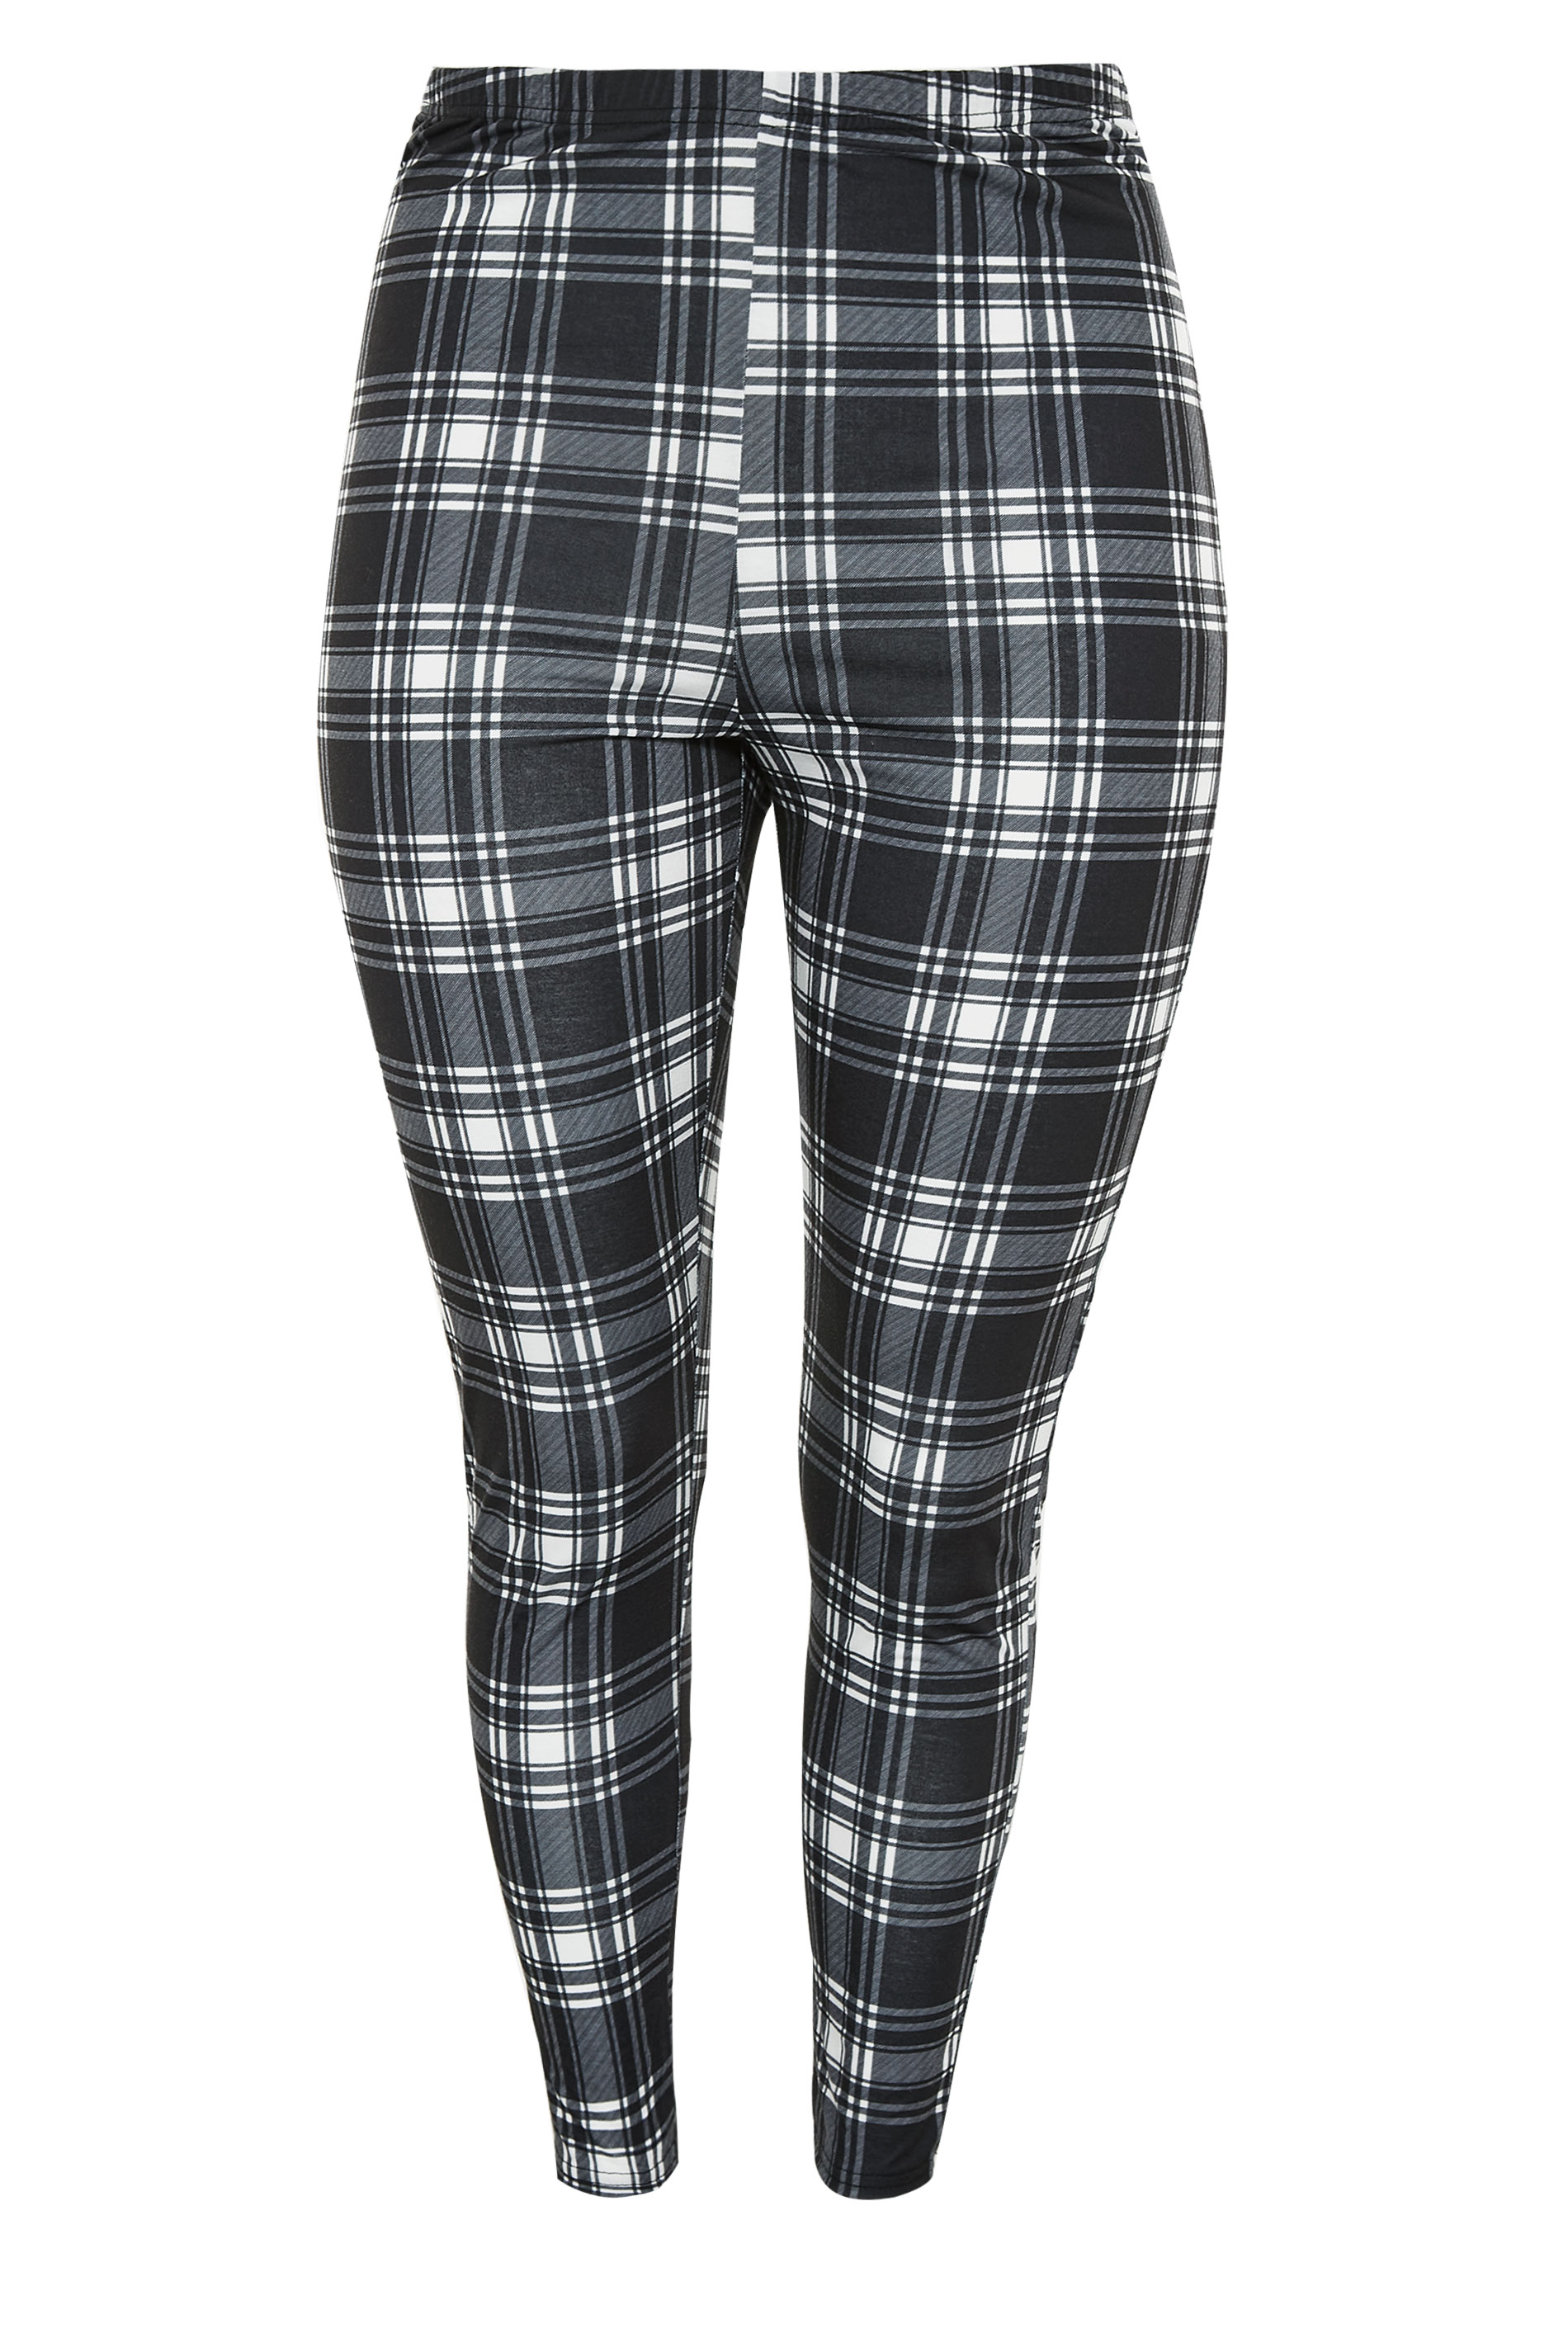 YOURS Plus Size Black & Red Check Print Leggings